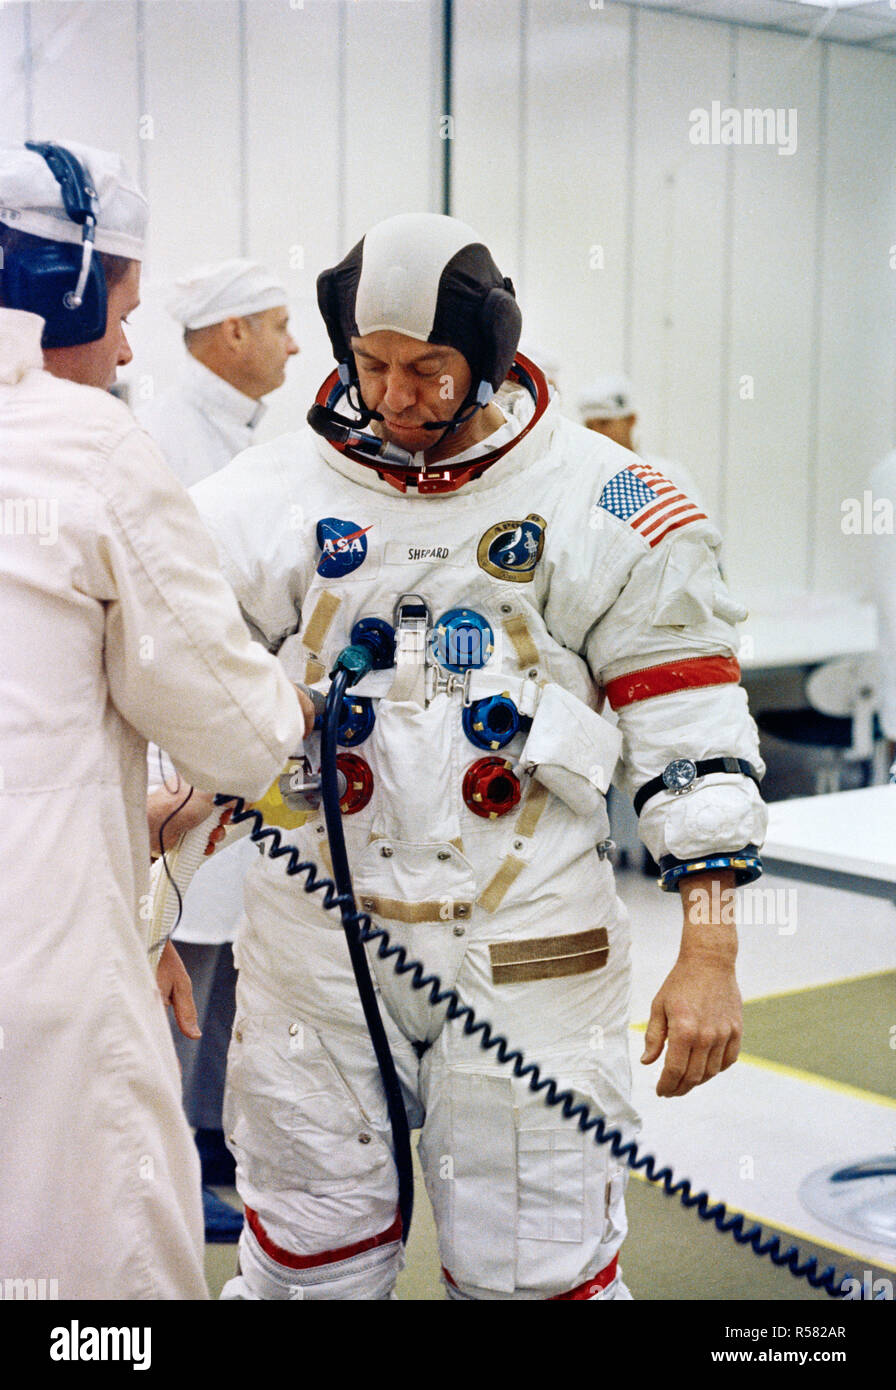 (31 Jan. 1971) --- Astronaut Alan B. Shepard Jr., commander, undergoes suiting up operations at the Kennedy Space Center (KSC) during the Apollo 14 prelaunch countdown. Stock Photo